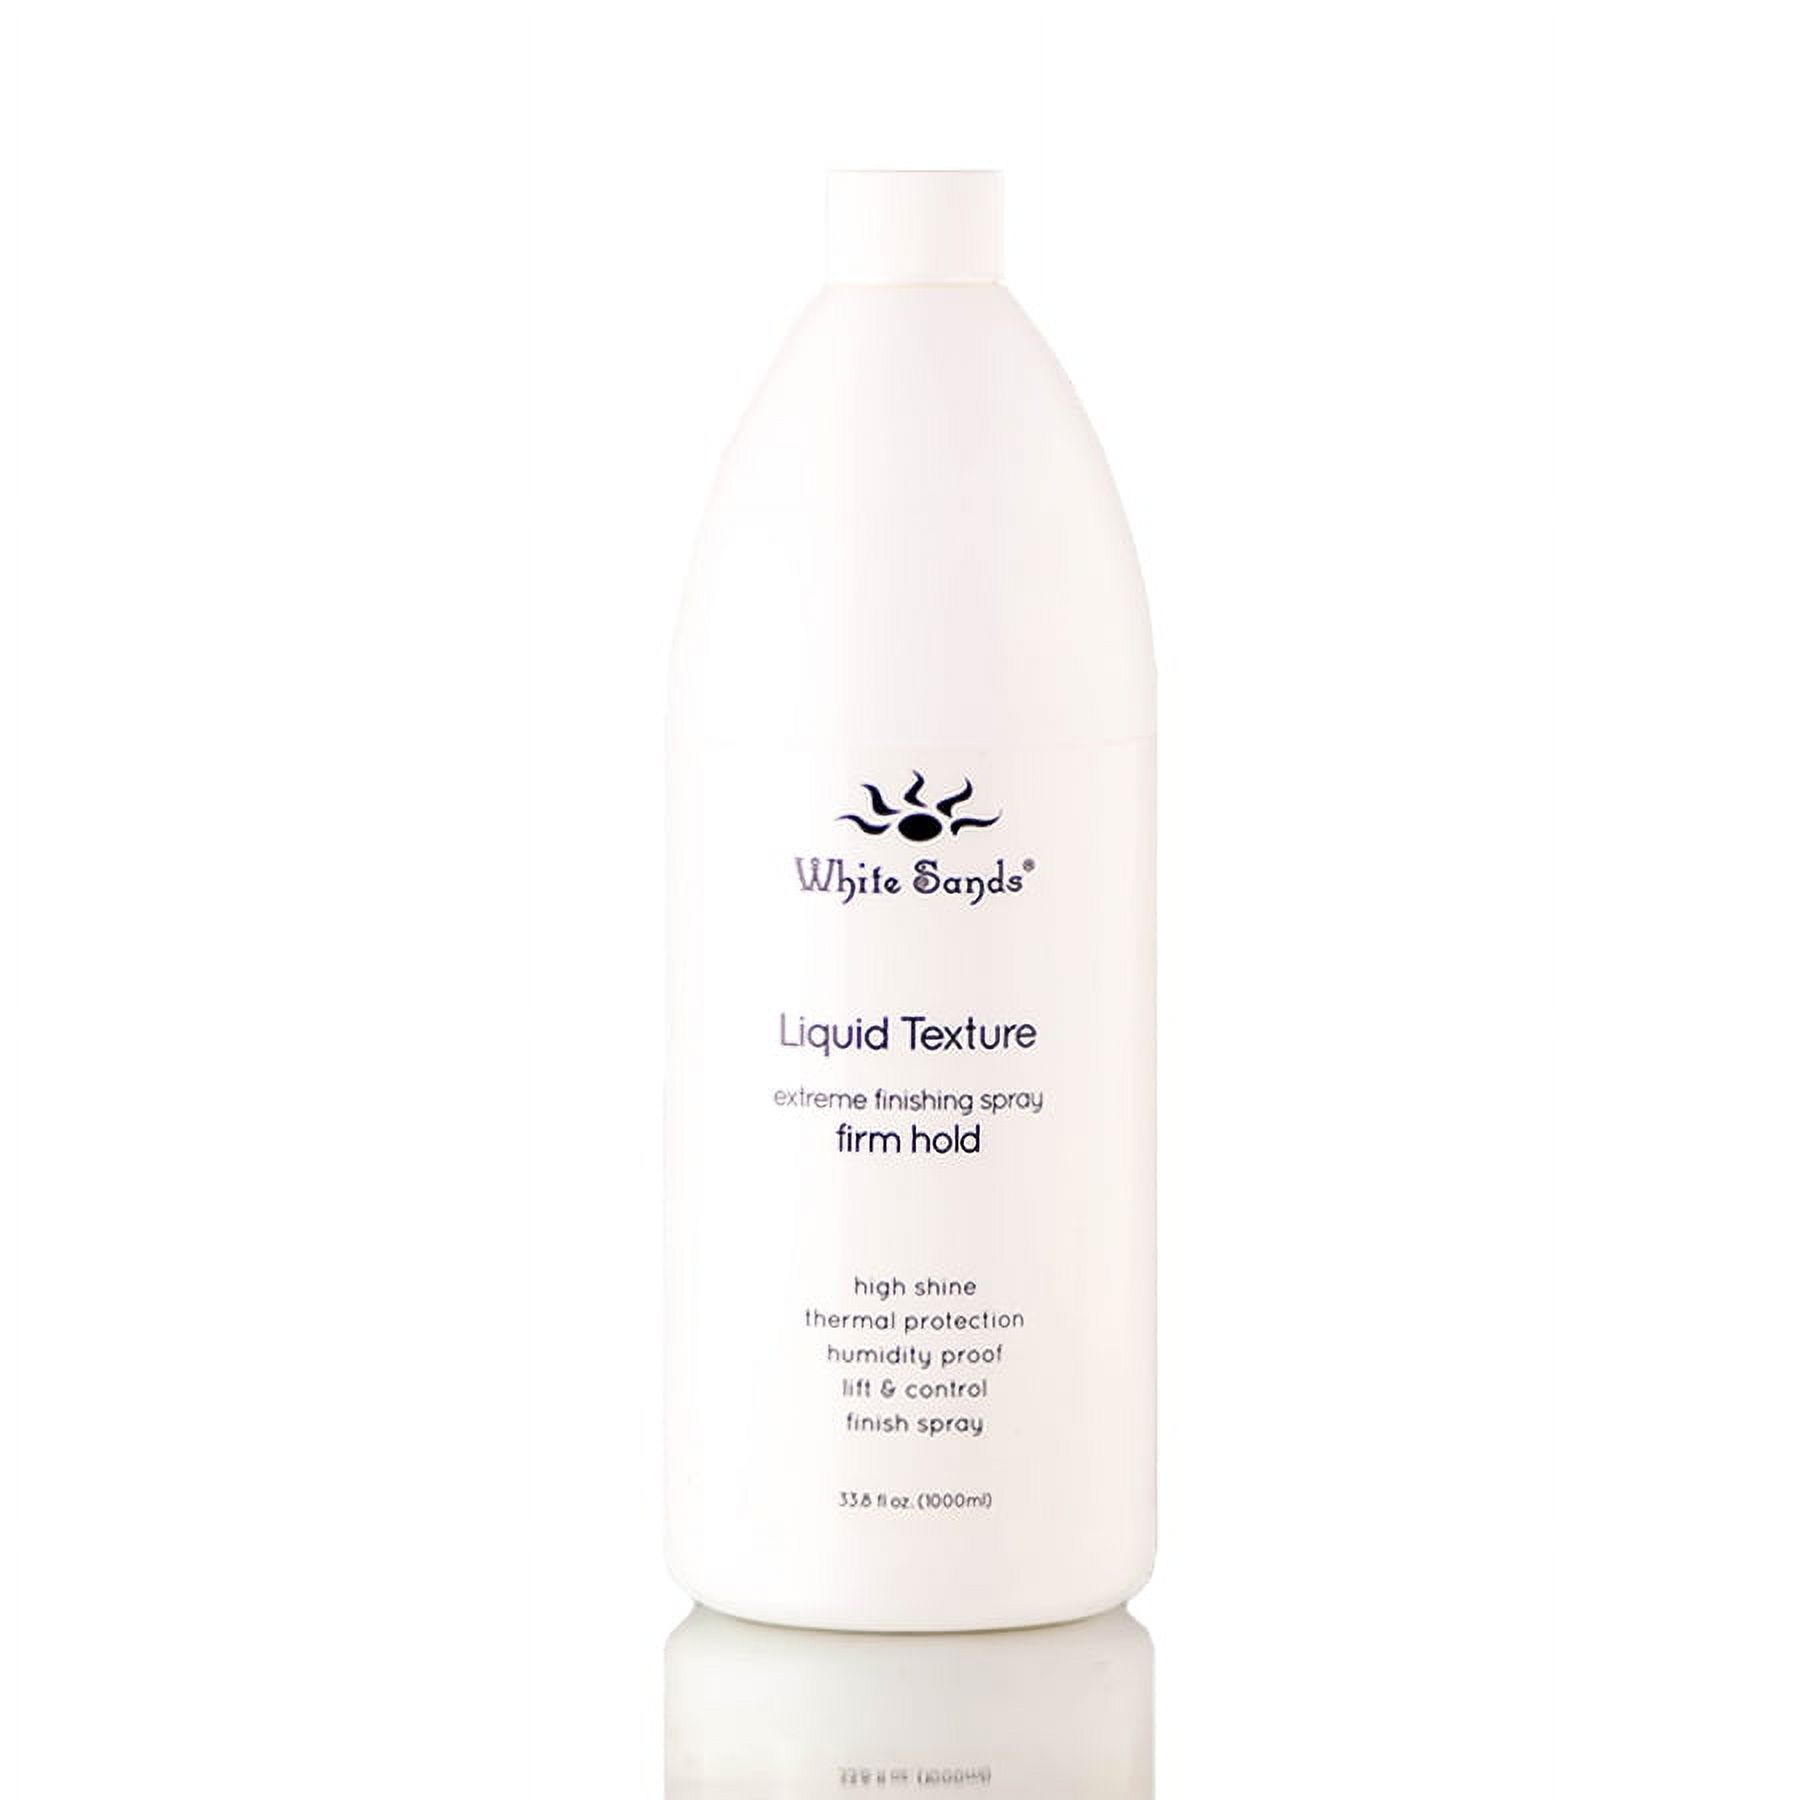 White Sands Liquid Texture - Firm Hold Extreme Hairspray (33.8 oz / liter refill) - image 1 of 2